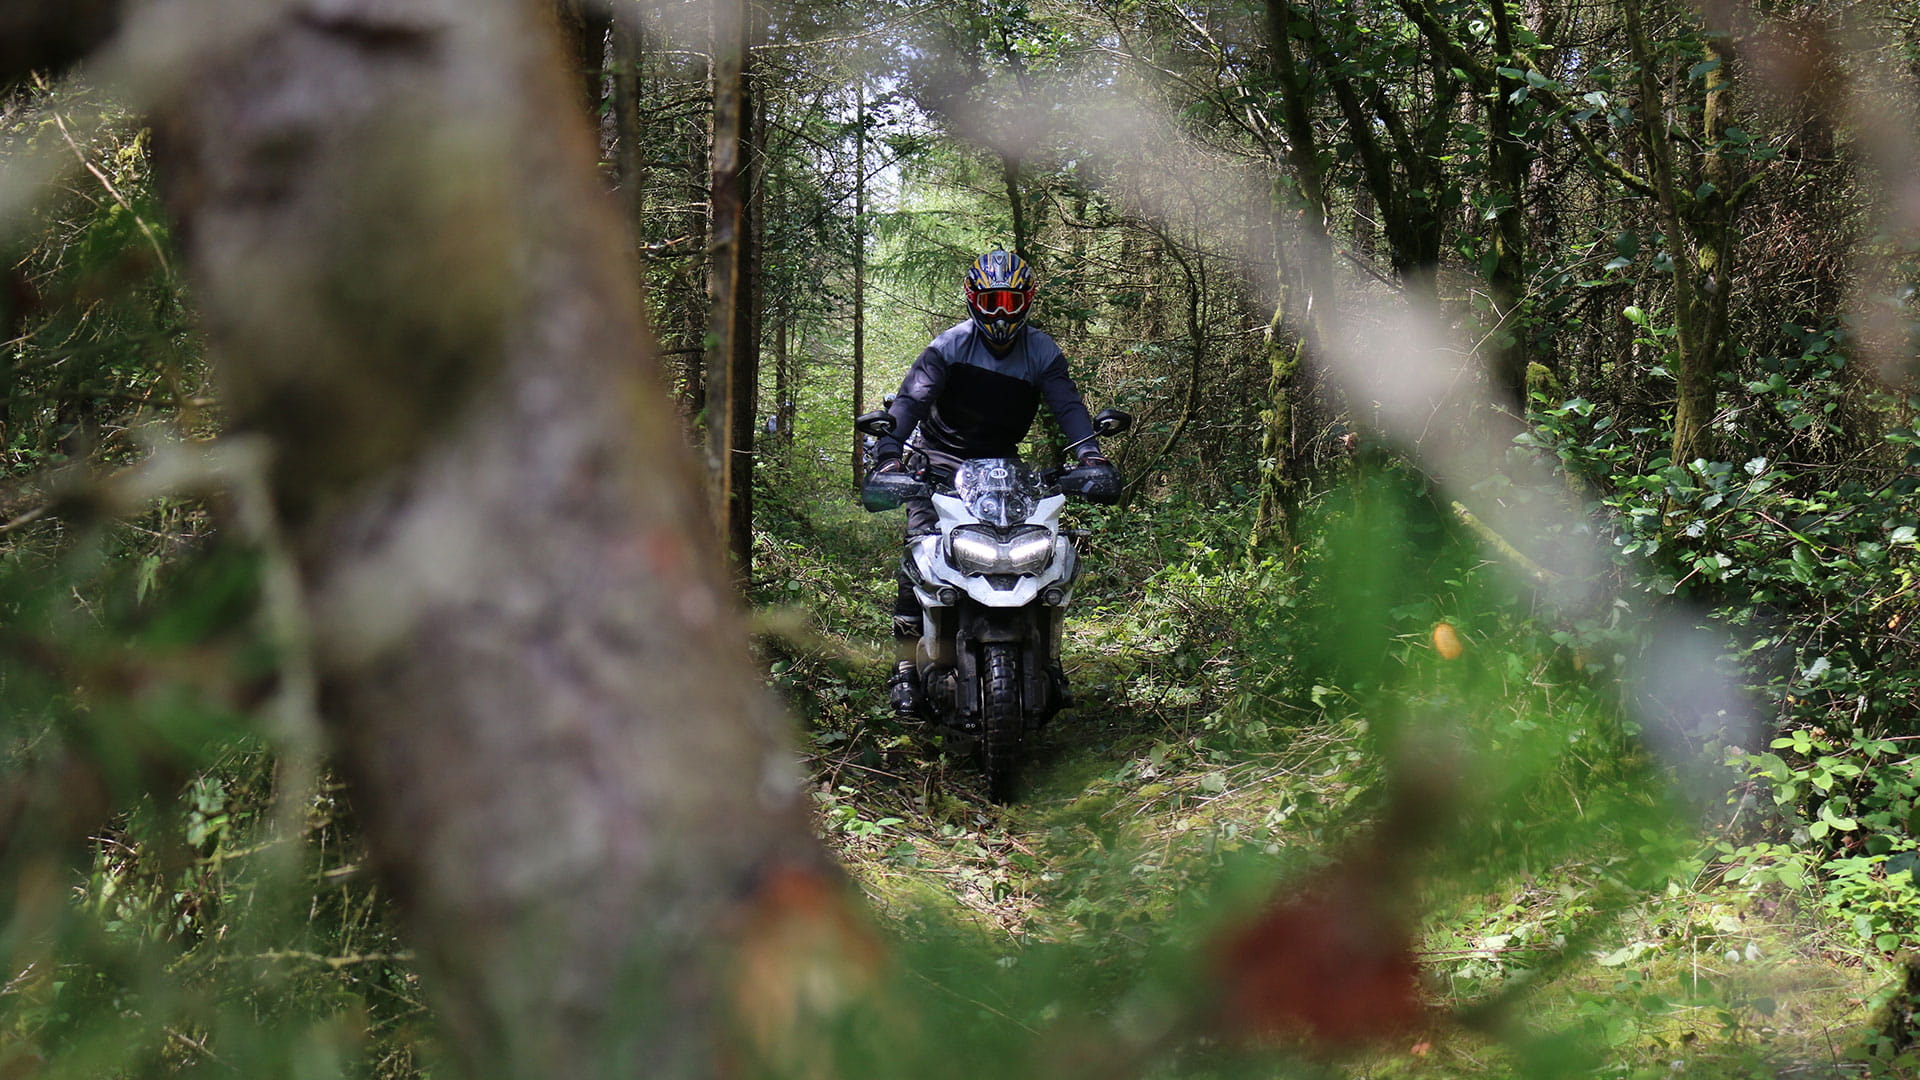 Solo rider on the Triumph Tiger 1200 passing through a rough trail